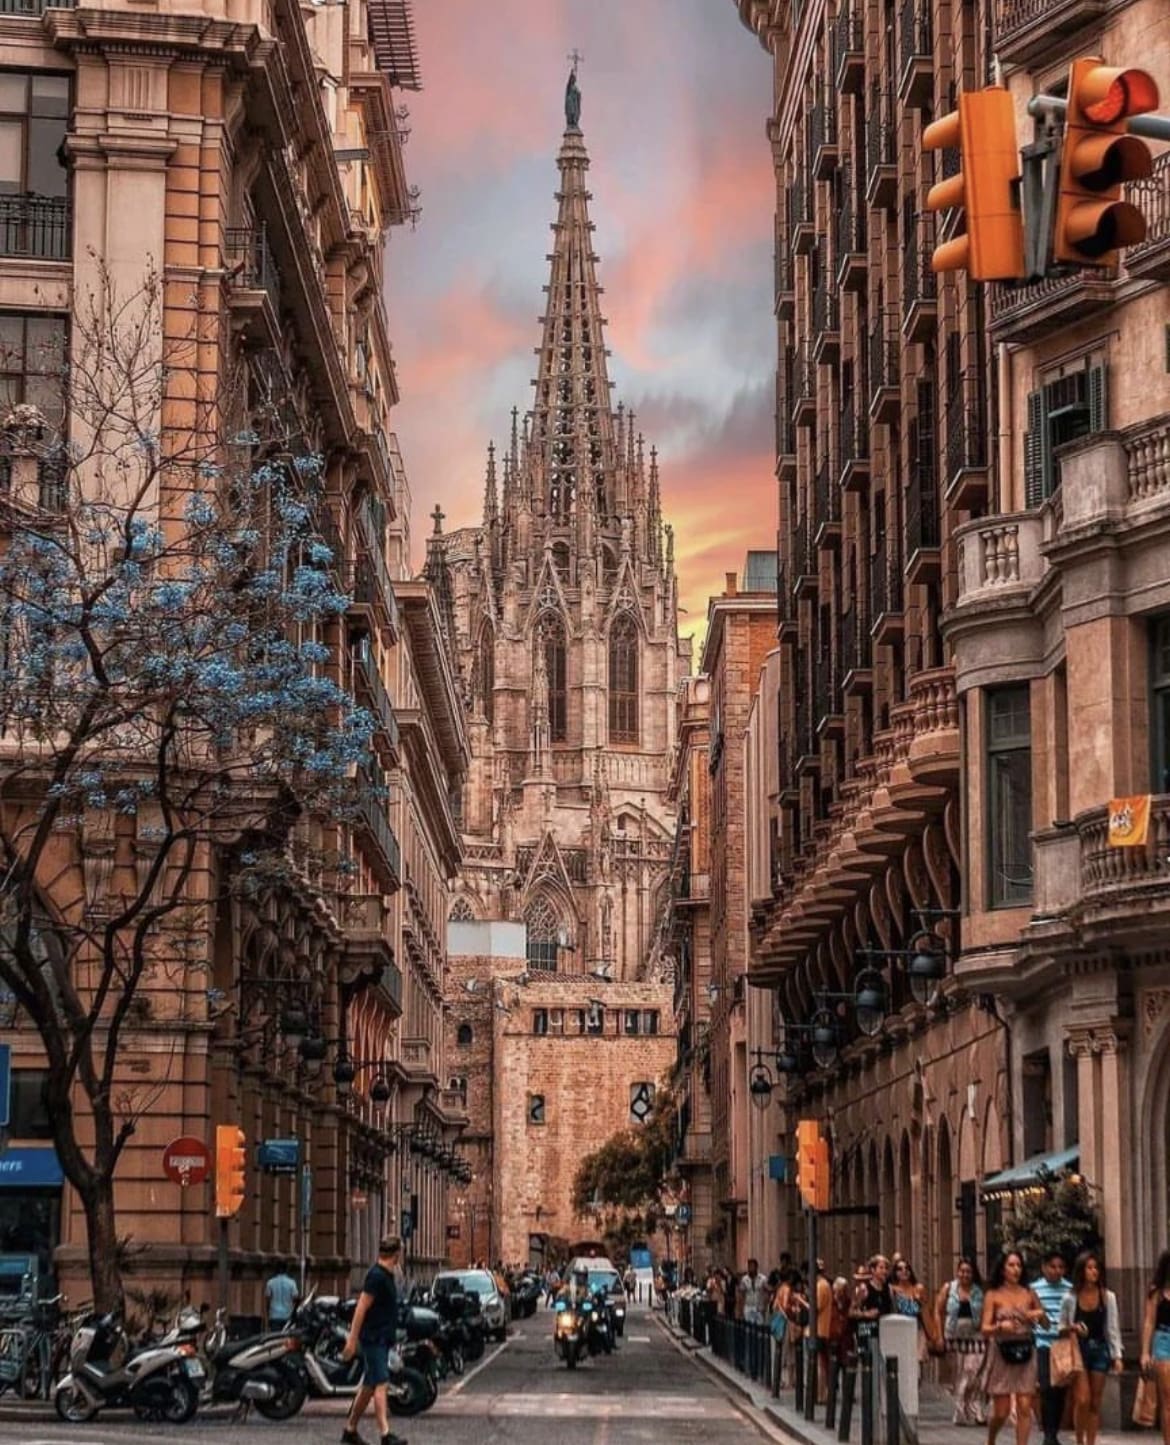 The Cathedral de Barcelona - Must-See Tourist Attractions in Spain